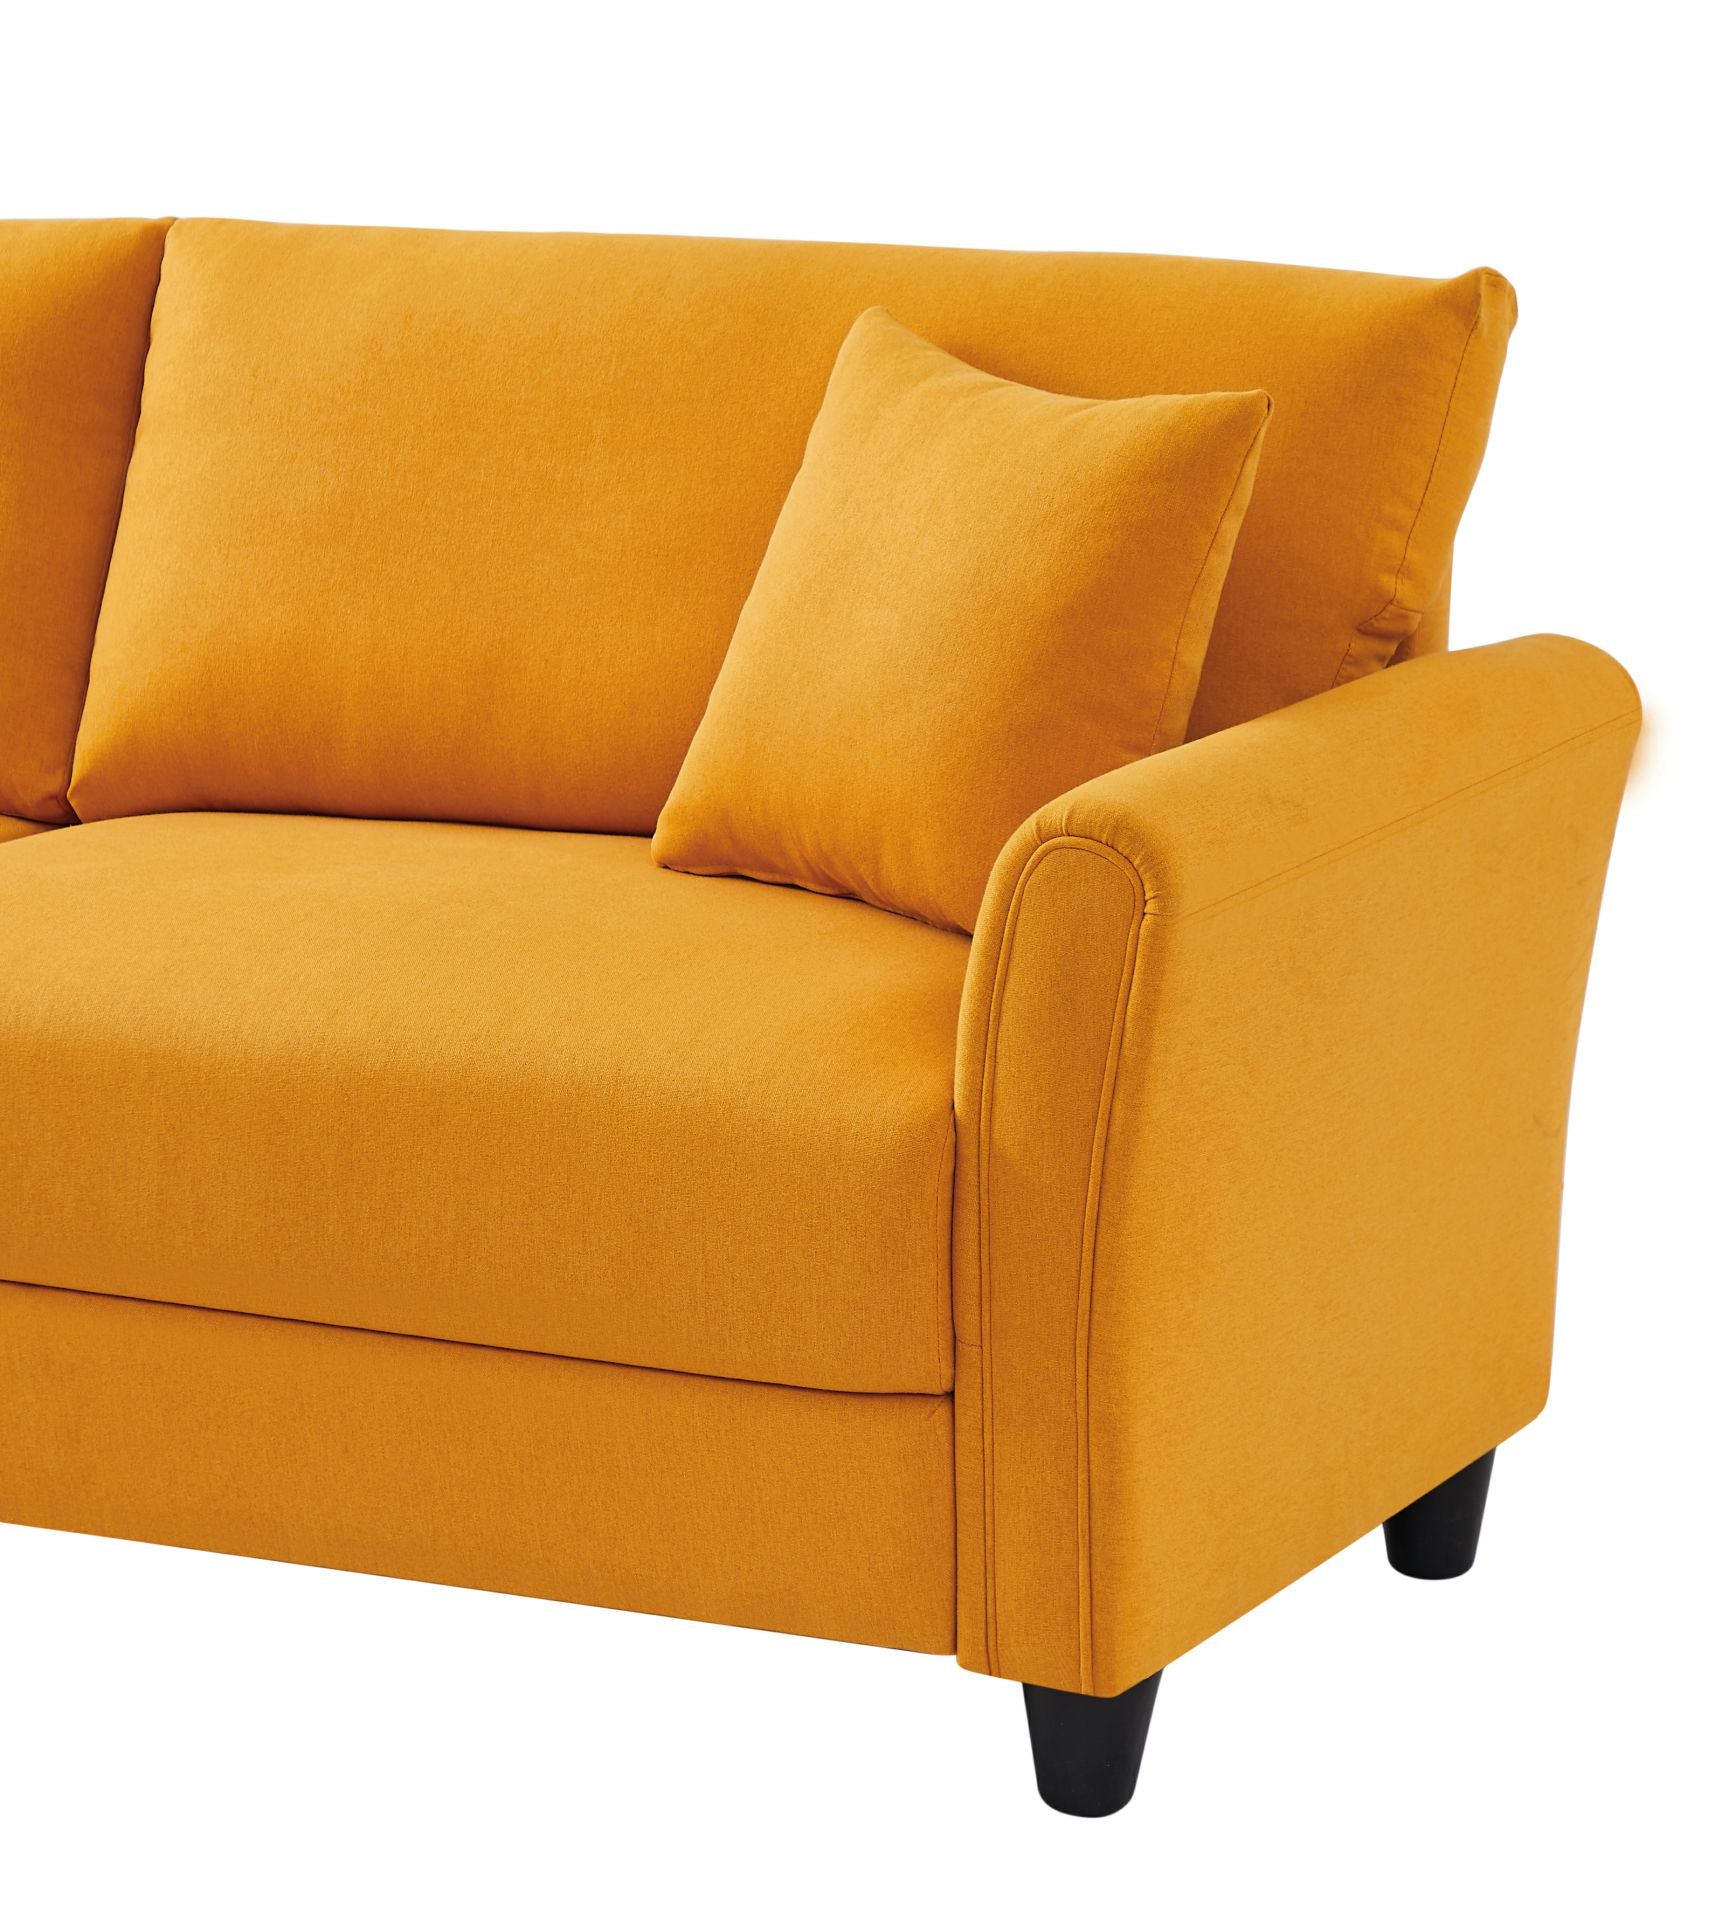 ZNTS Orange Linen, Three-person Indoor Sofa, Two Throw Pillows, Solid Wood Frame, Plastic Feet 22223501